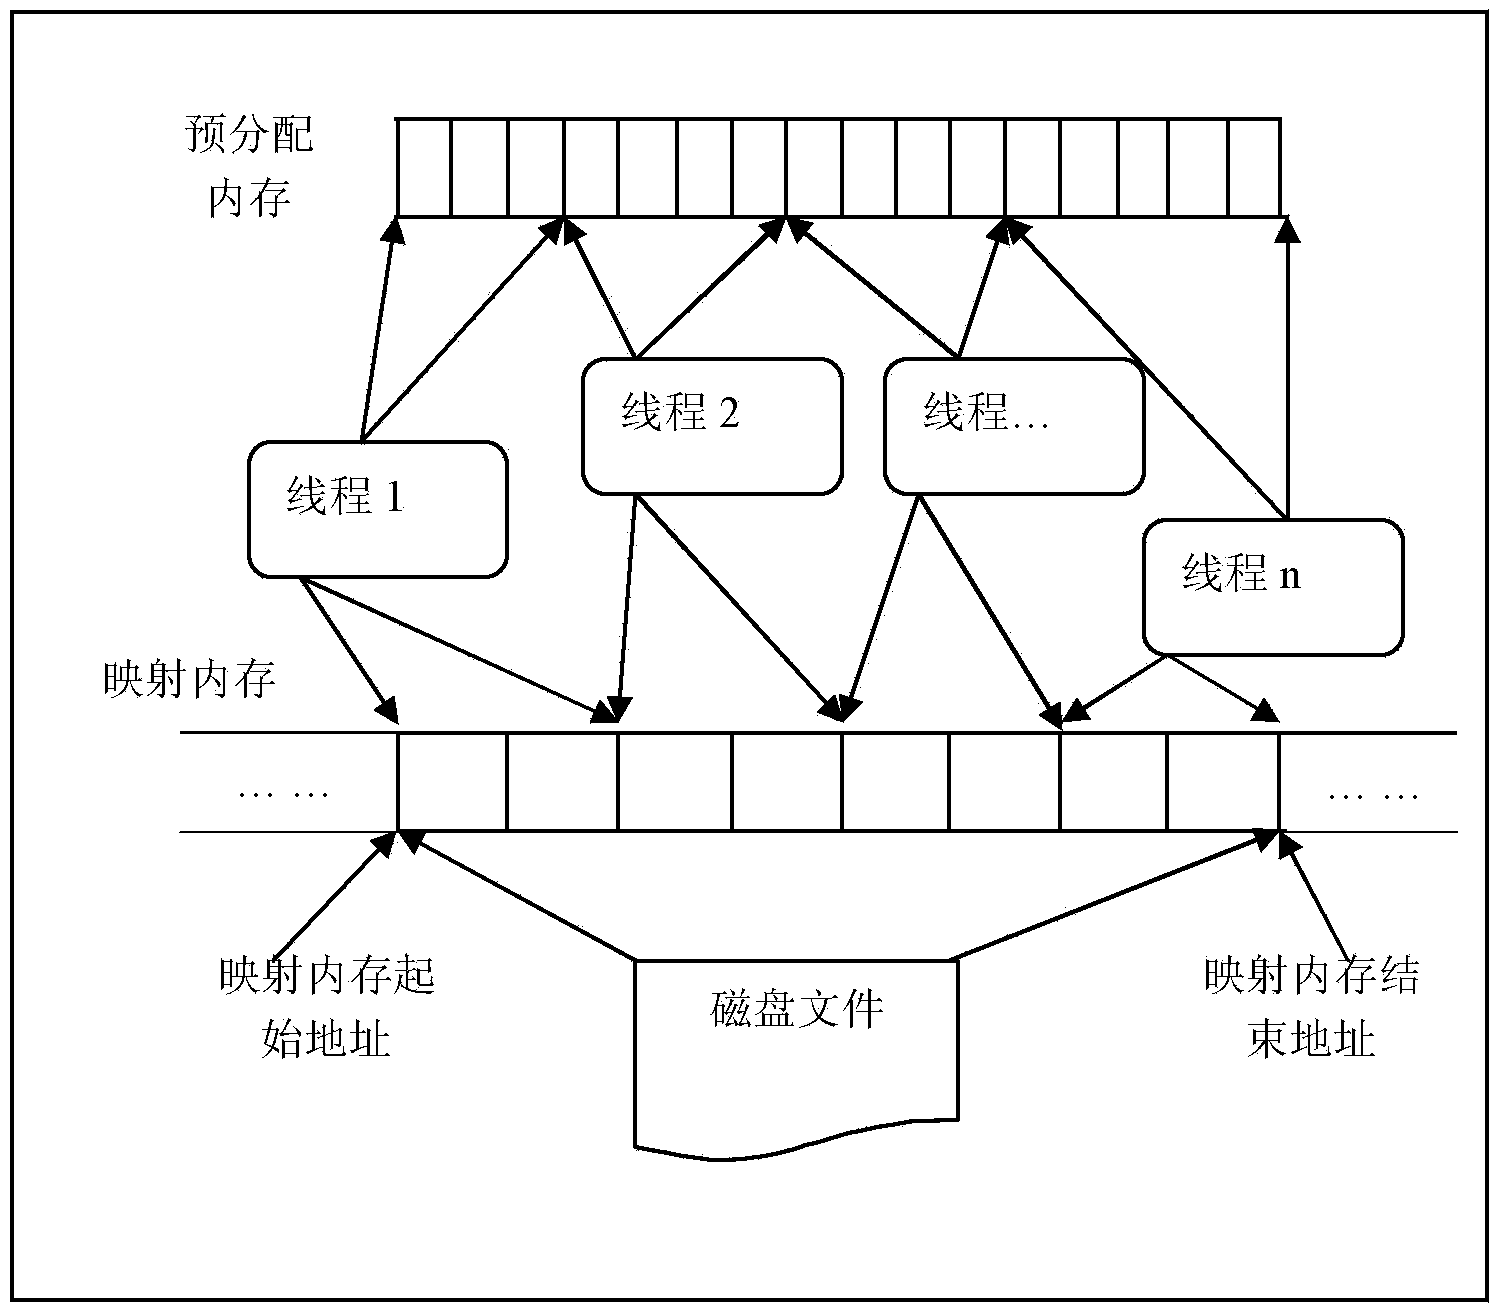 Rapid large-scale point-cloud data reading method based on memory pre-distribution and multi-point writing technology